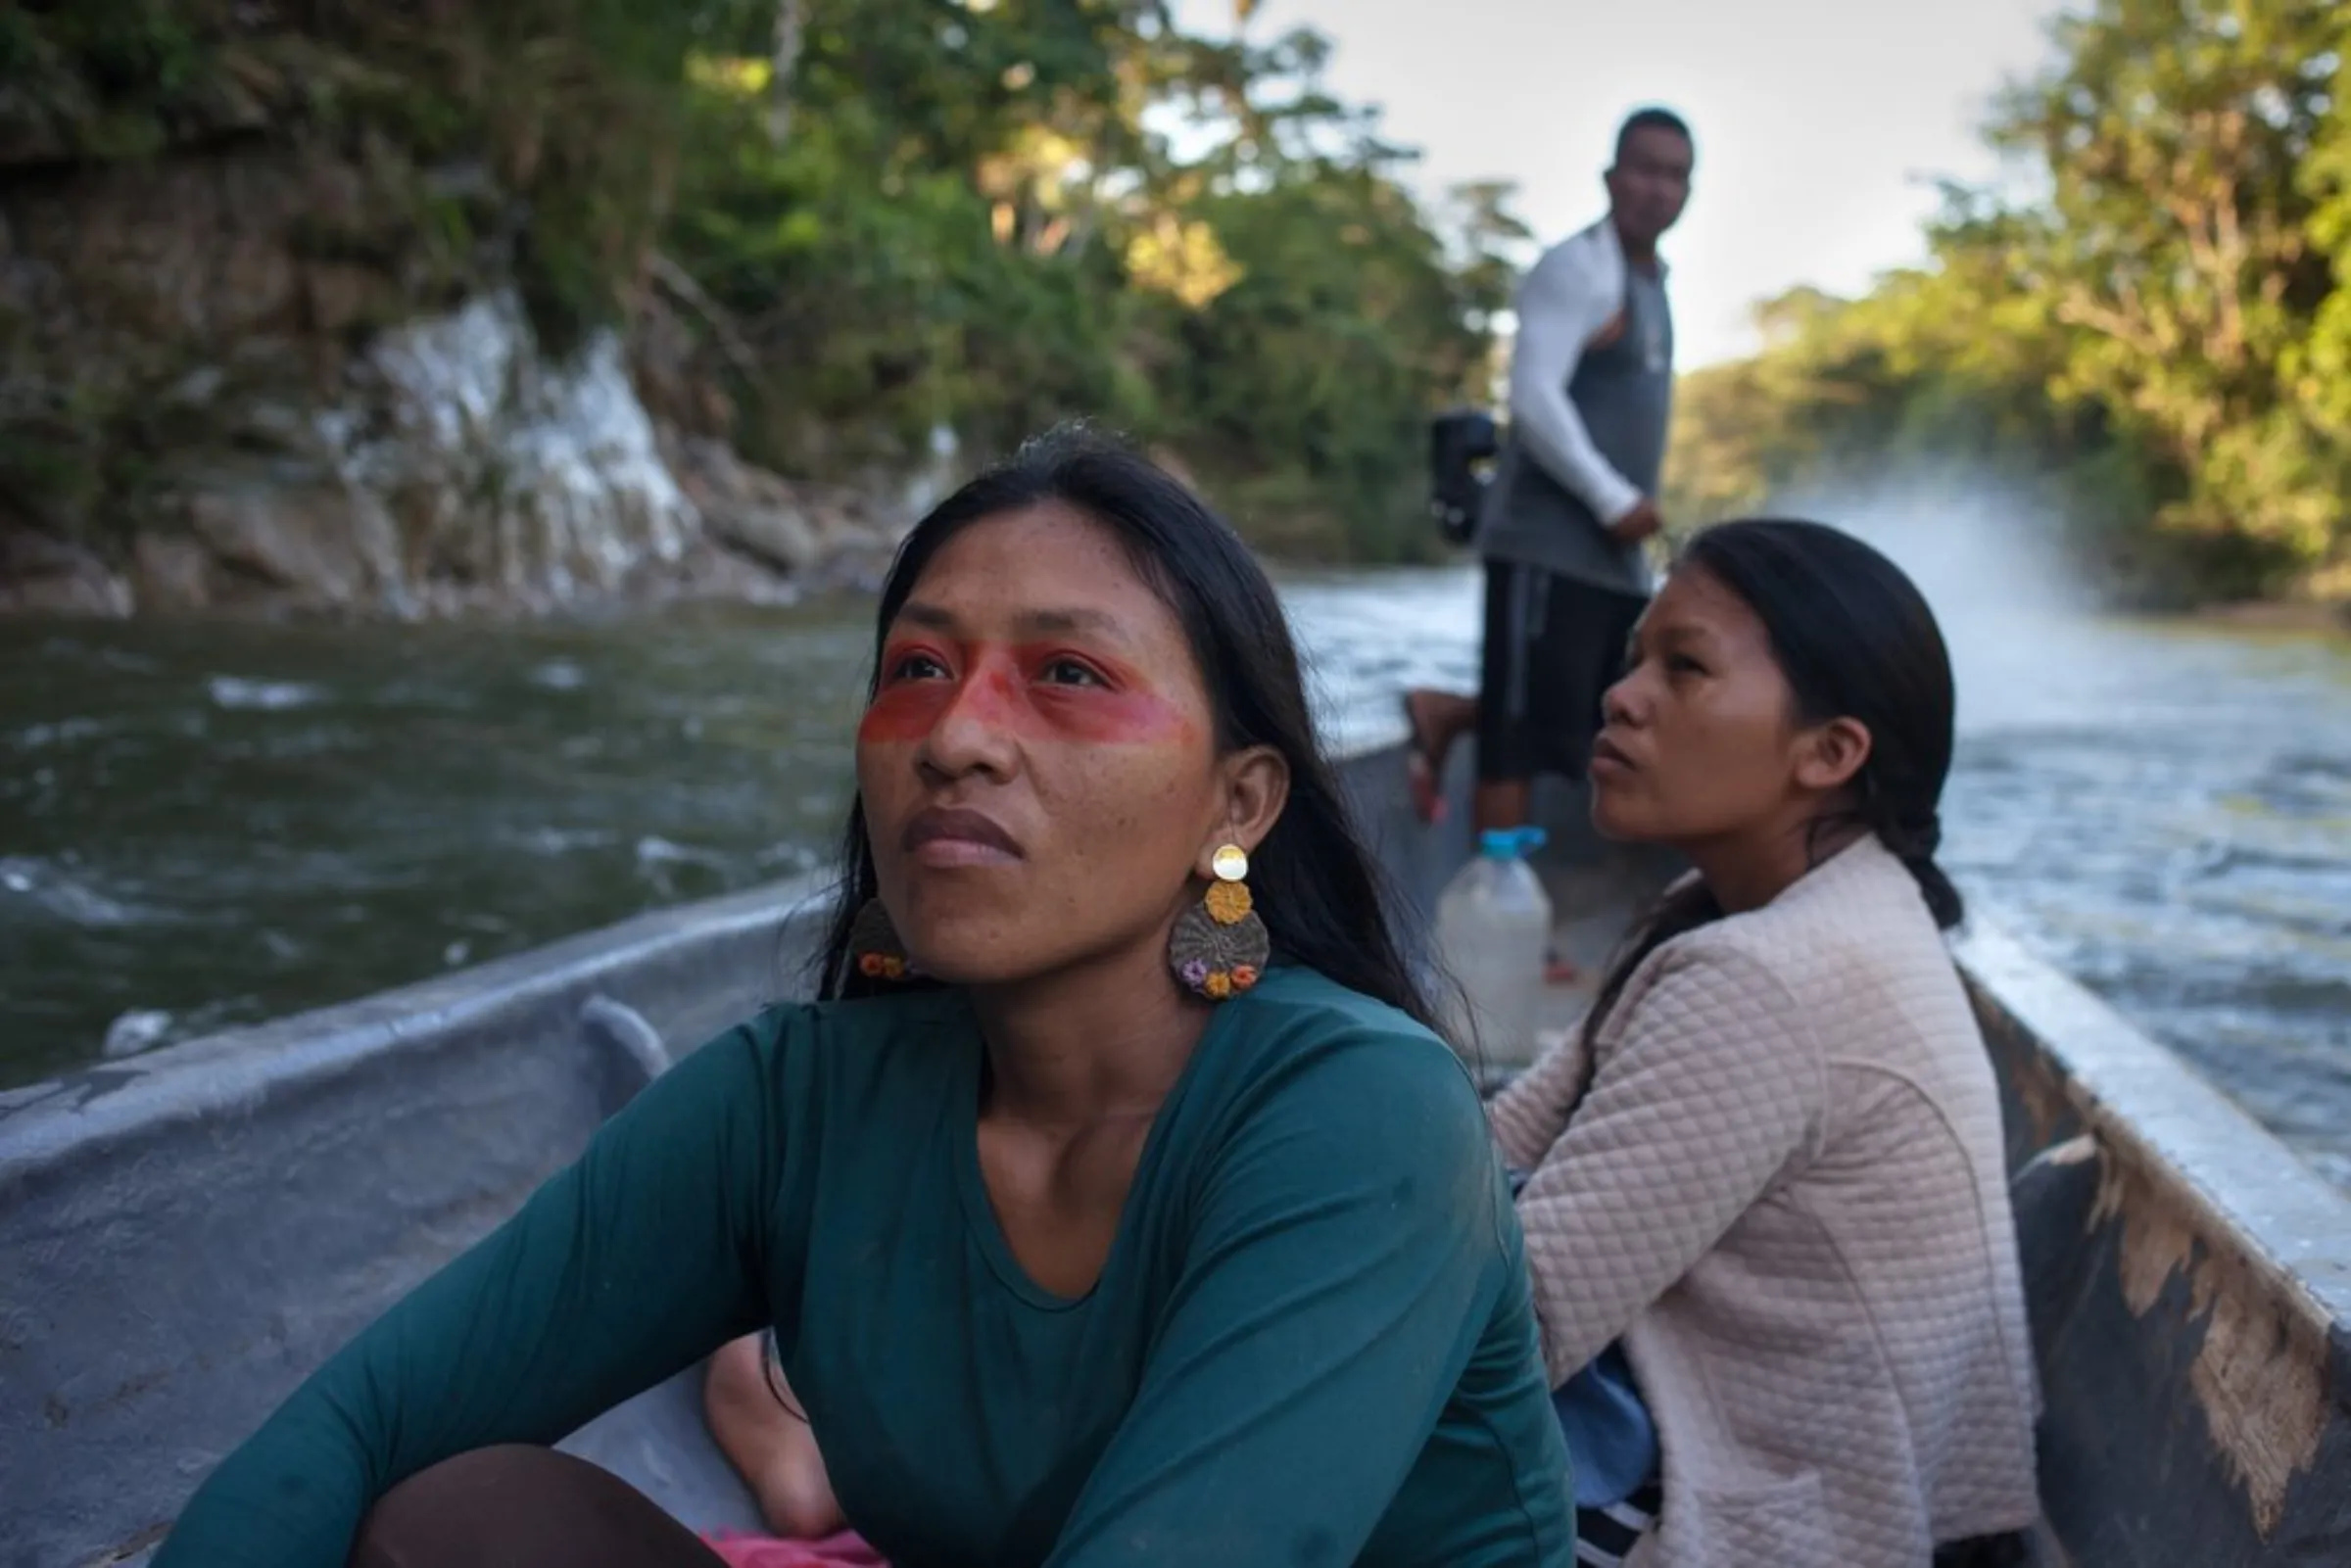 Silvana Nihua, president of the Waorani Organization of Pastaza (OWAP), travels along the Curaray River where indigenous communities reside in riverside villages in the Amazon province of Pastaza, Ecuador, on April 26, 2022